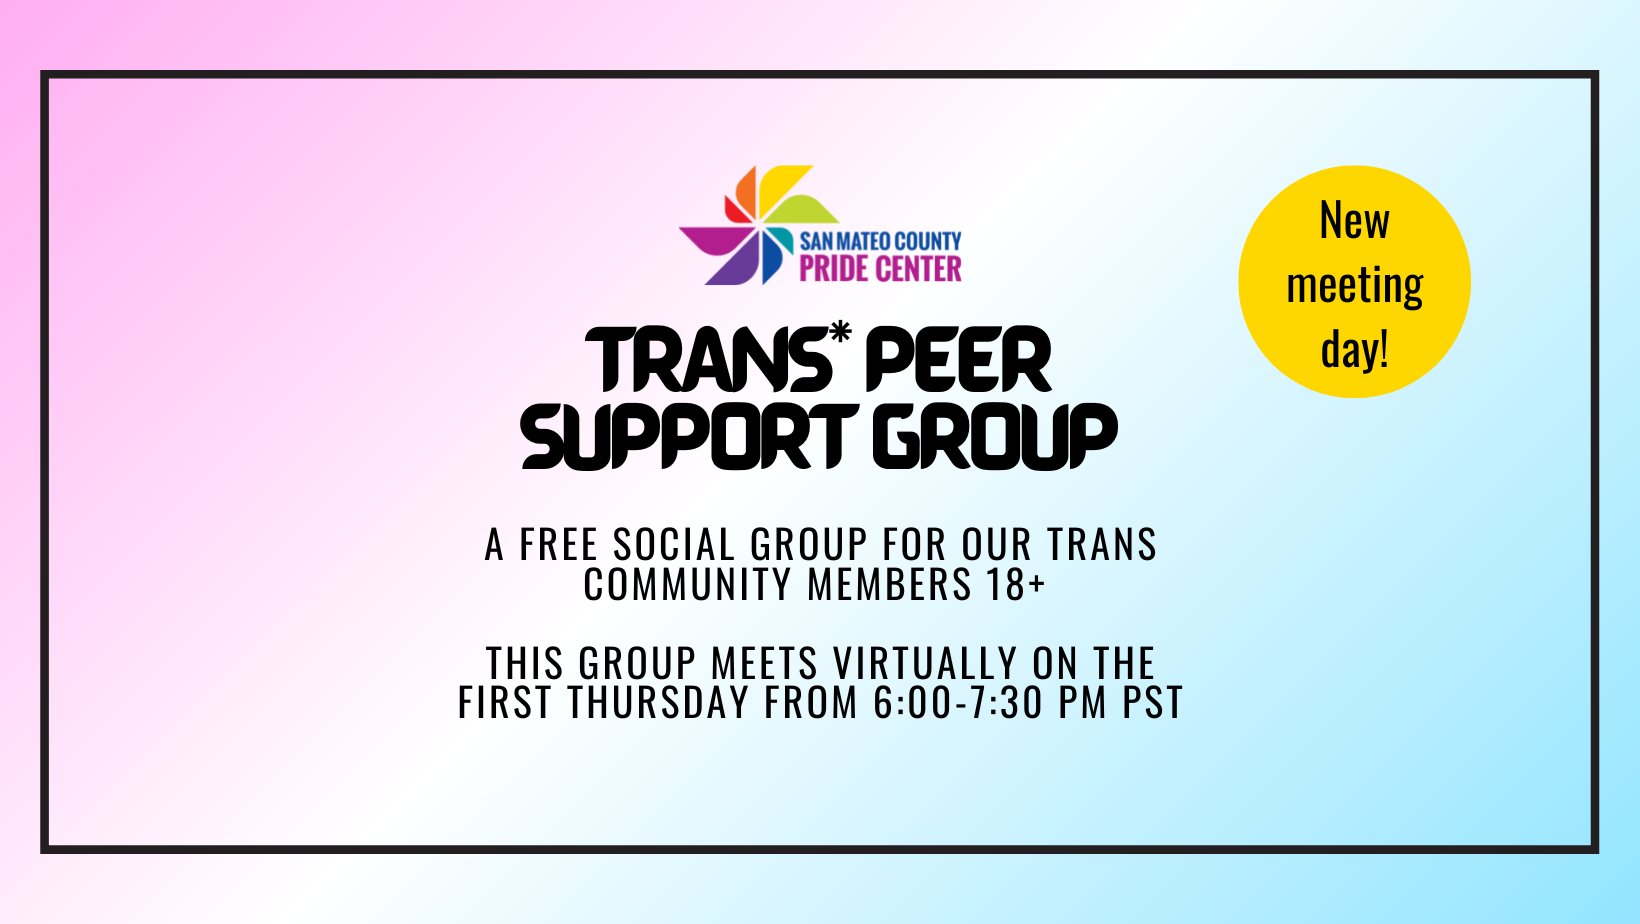 A poster for the trans peer support group.